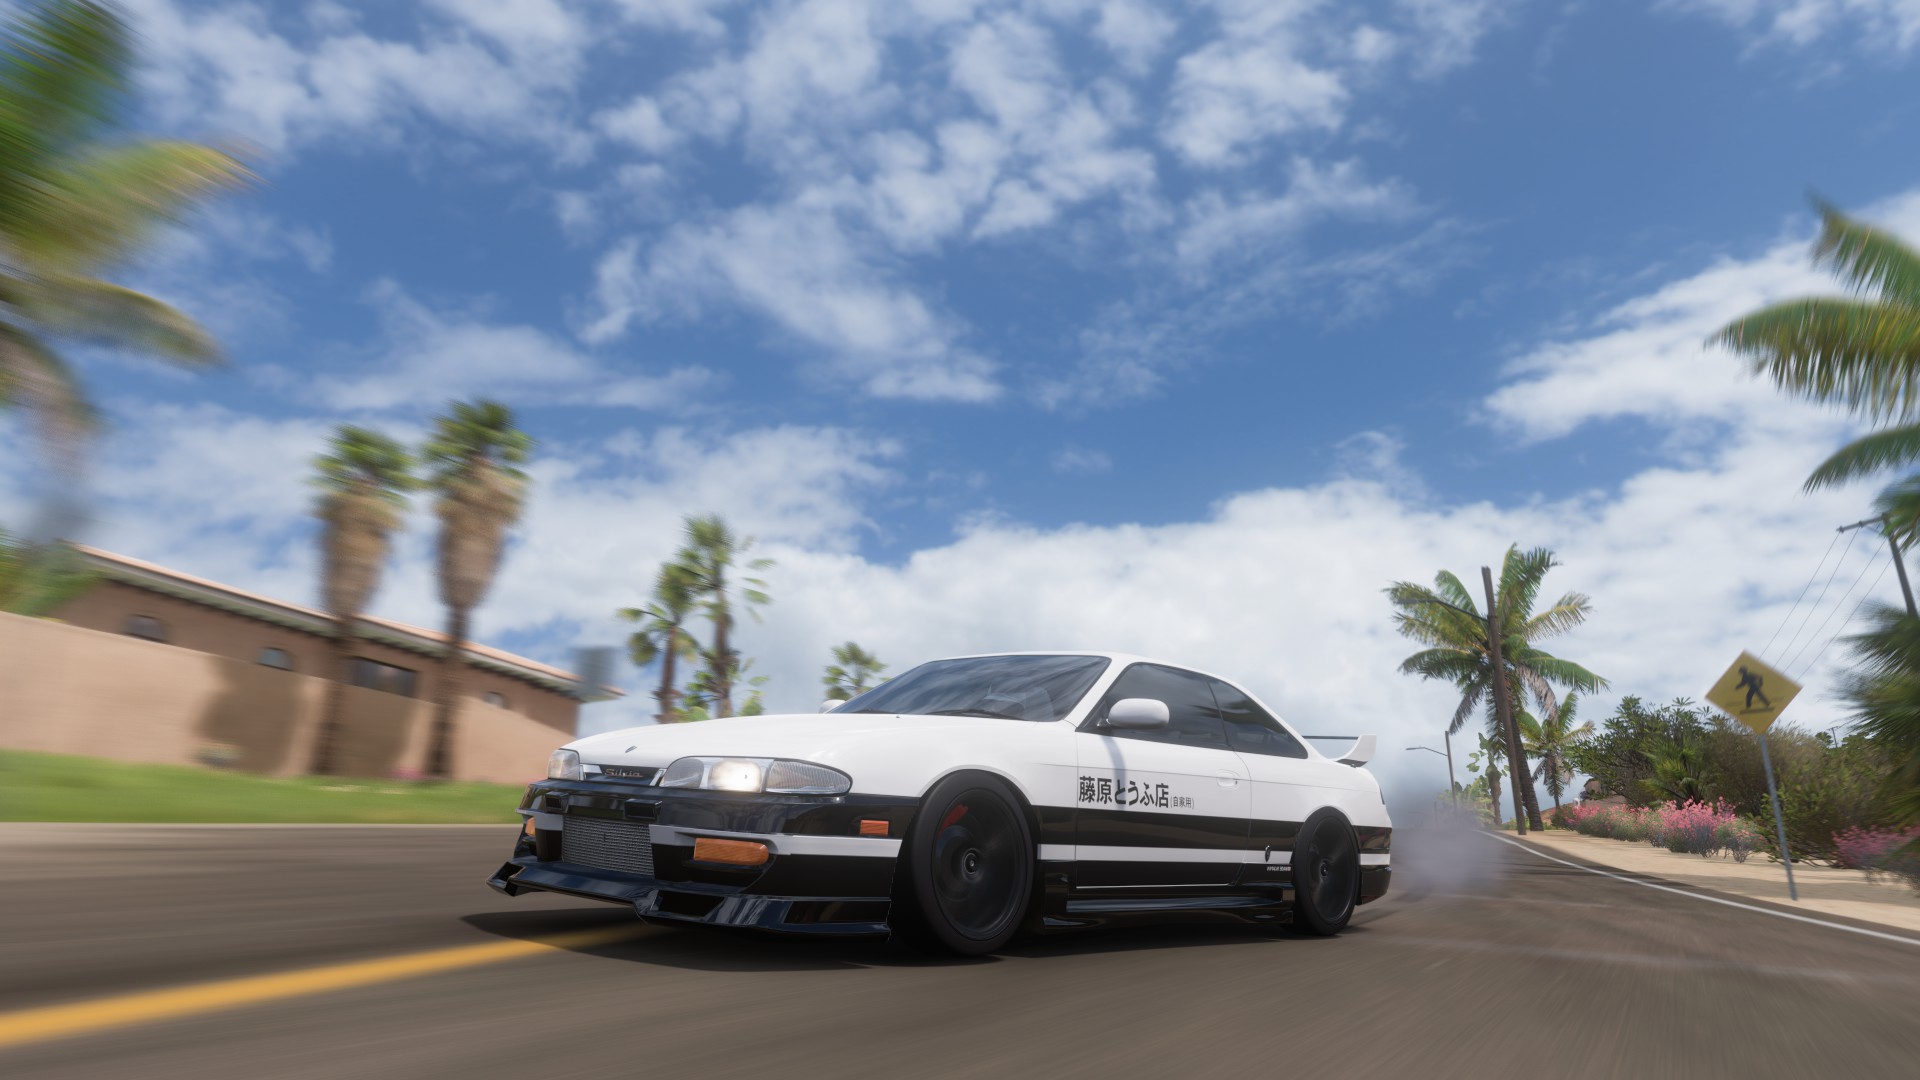 General 1920x1080 Initial D Nissan Silvia S14 Forza Horizon 5 Nissan Japanese cars video games PlaygroundGames sky clouds frontal view video game art CGI motion blur palm trees sign headlights